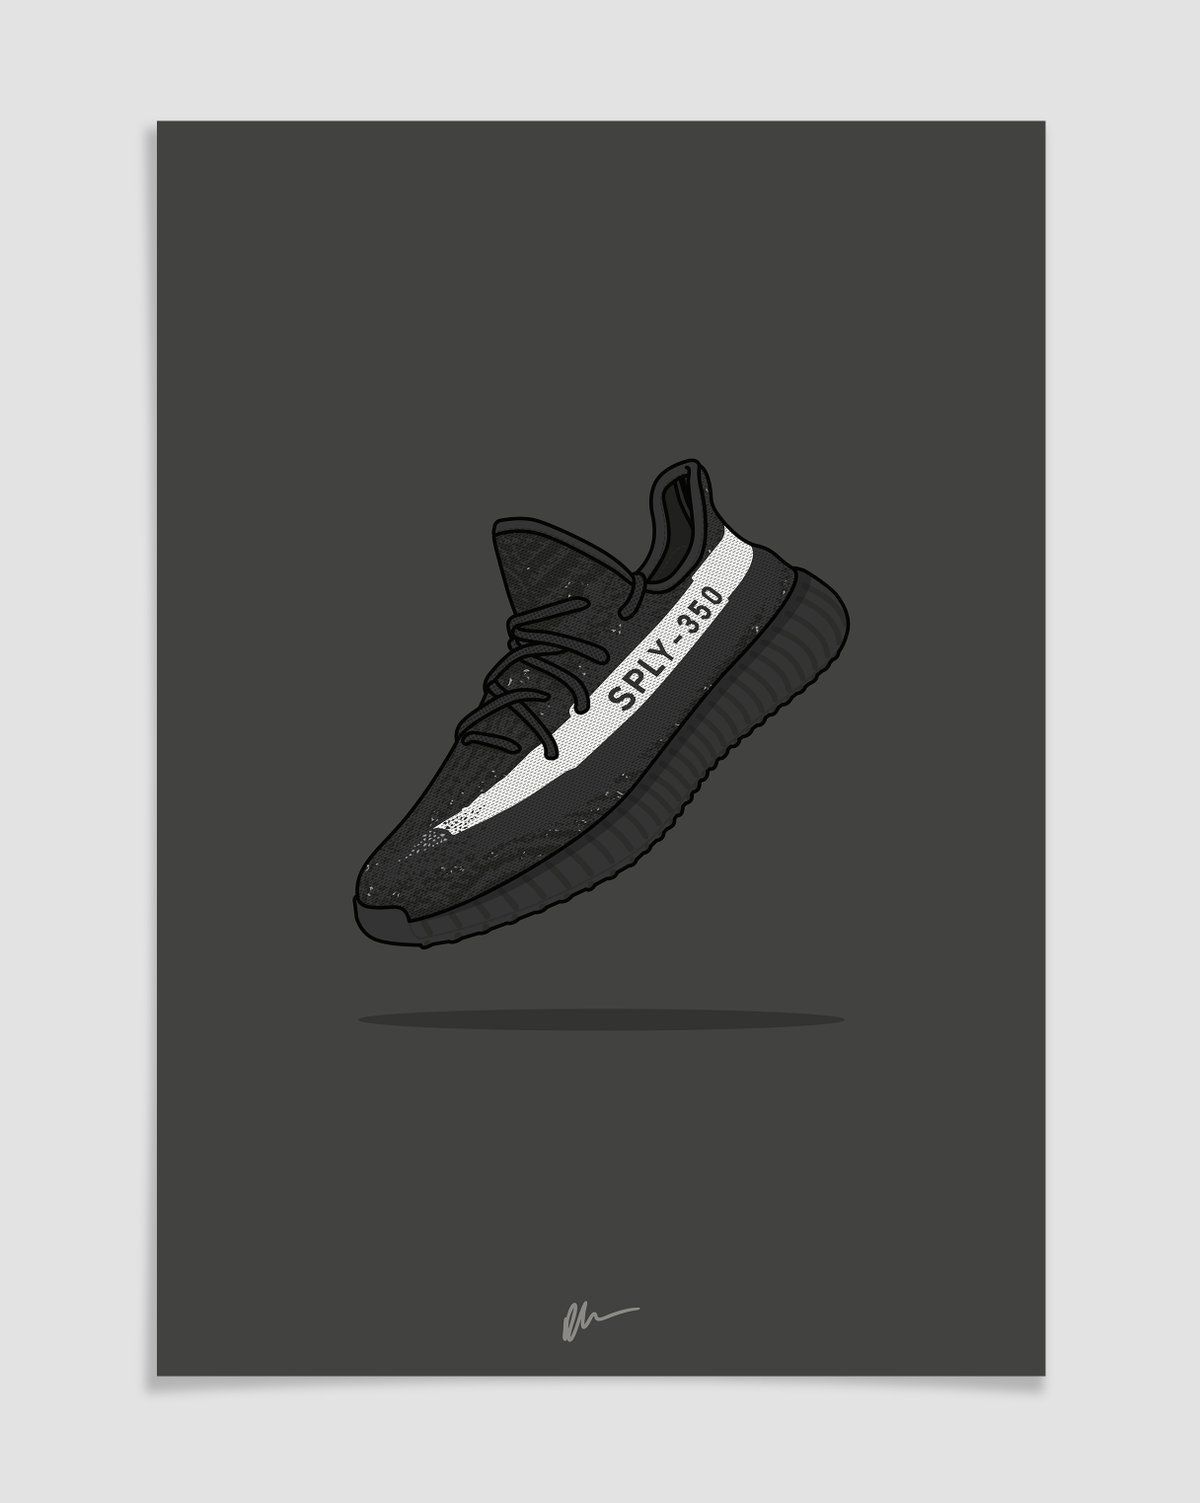 Image of Yeezy 350 v2 Black White. Sneakers wallpaper, Shoes wallpaper, Sneakers